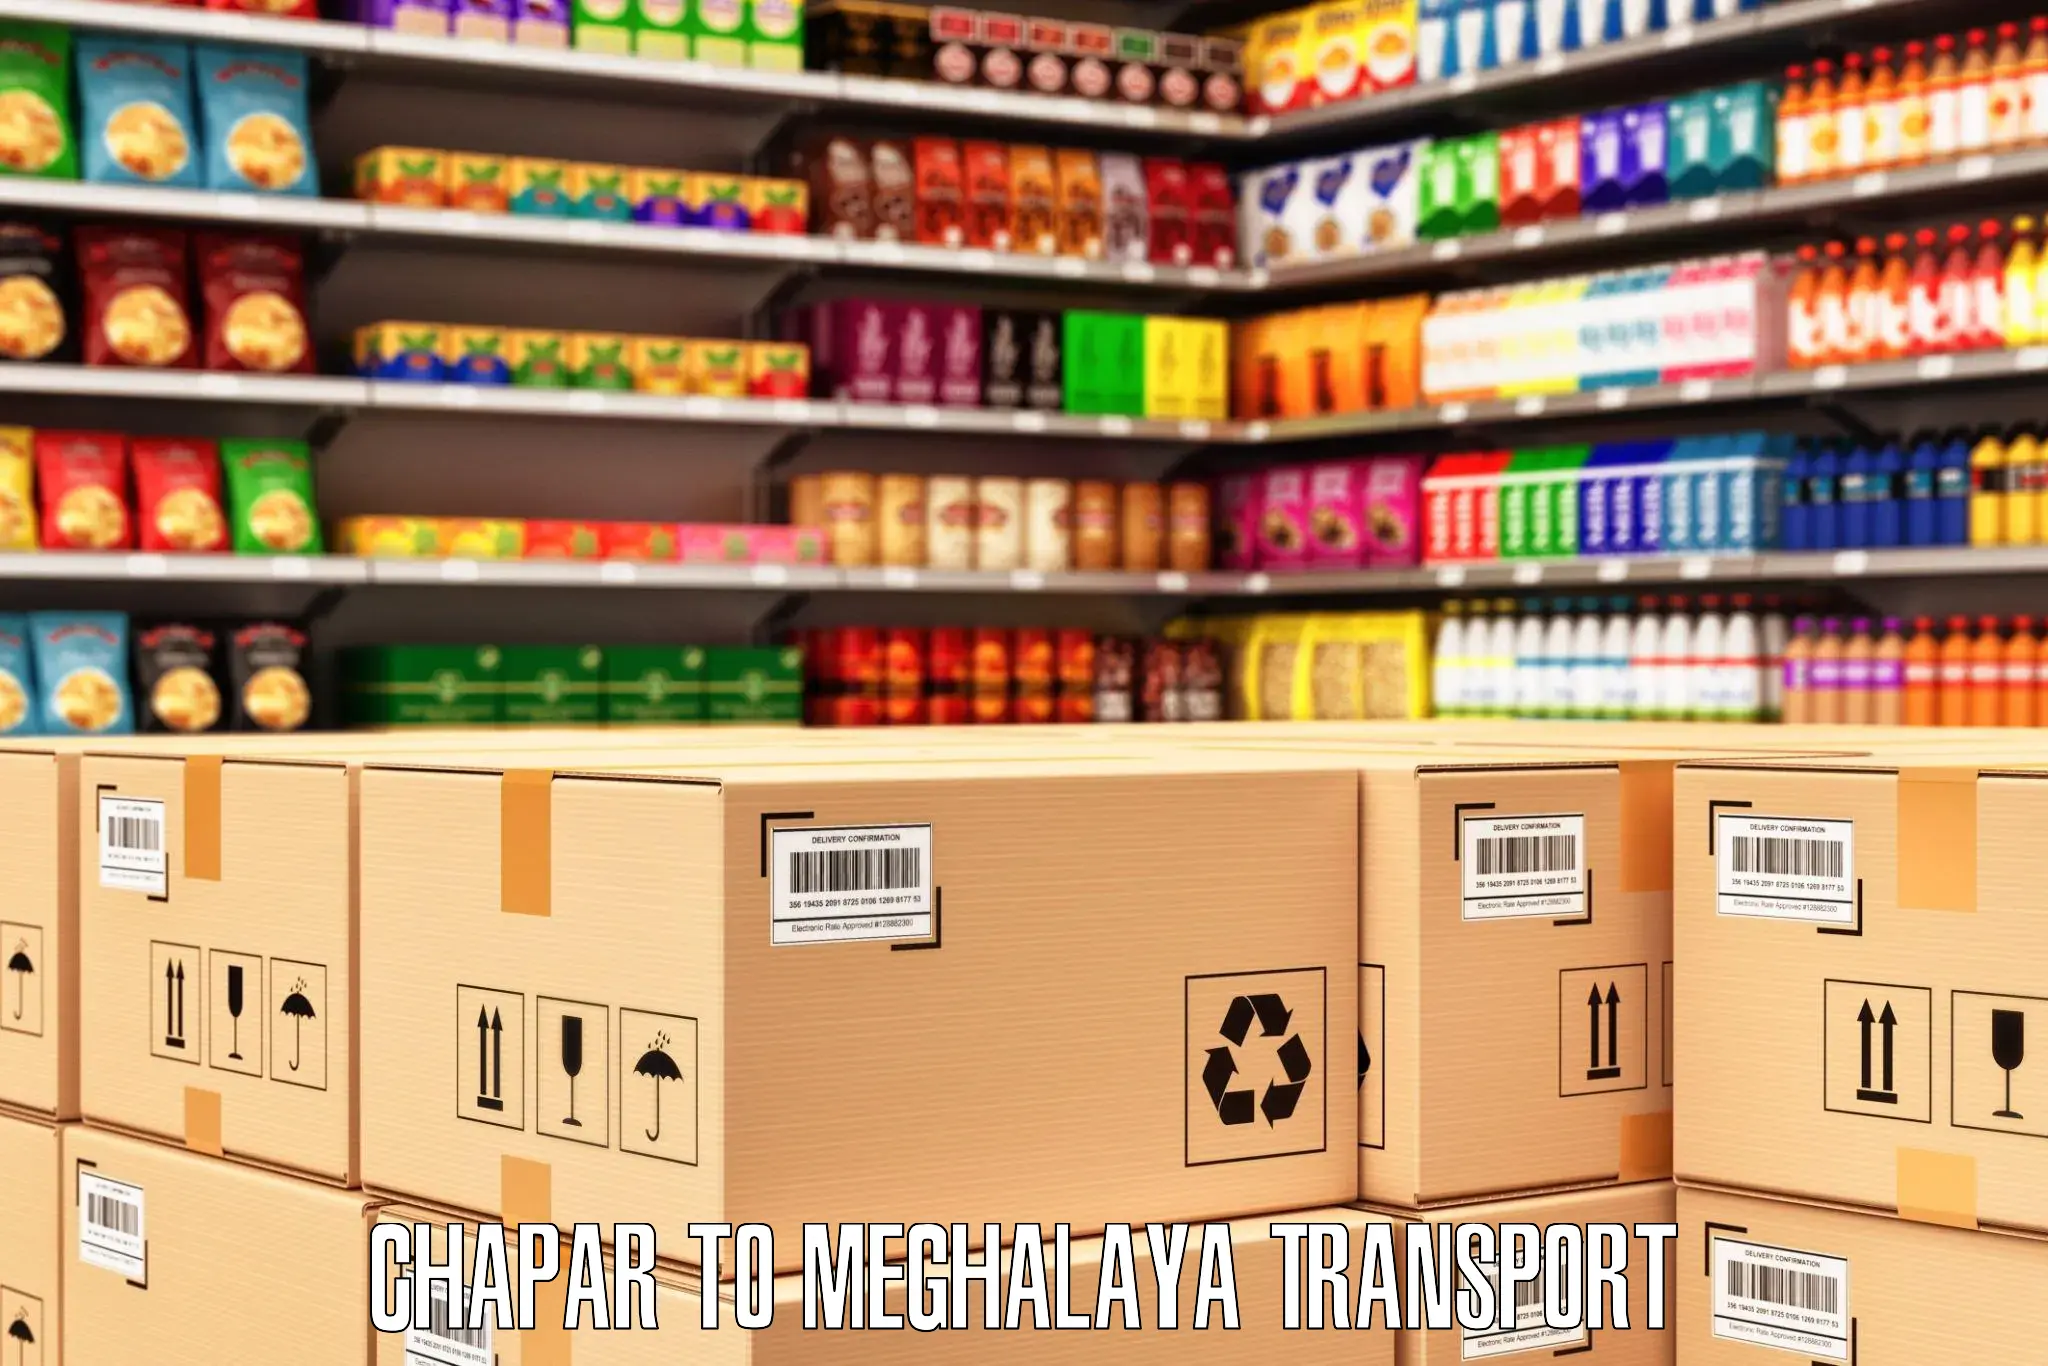 Container transport service Chapar to Jowai